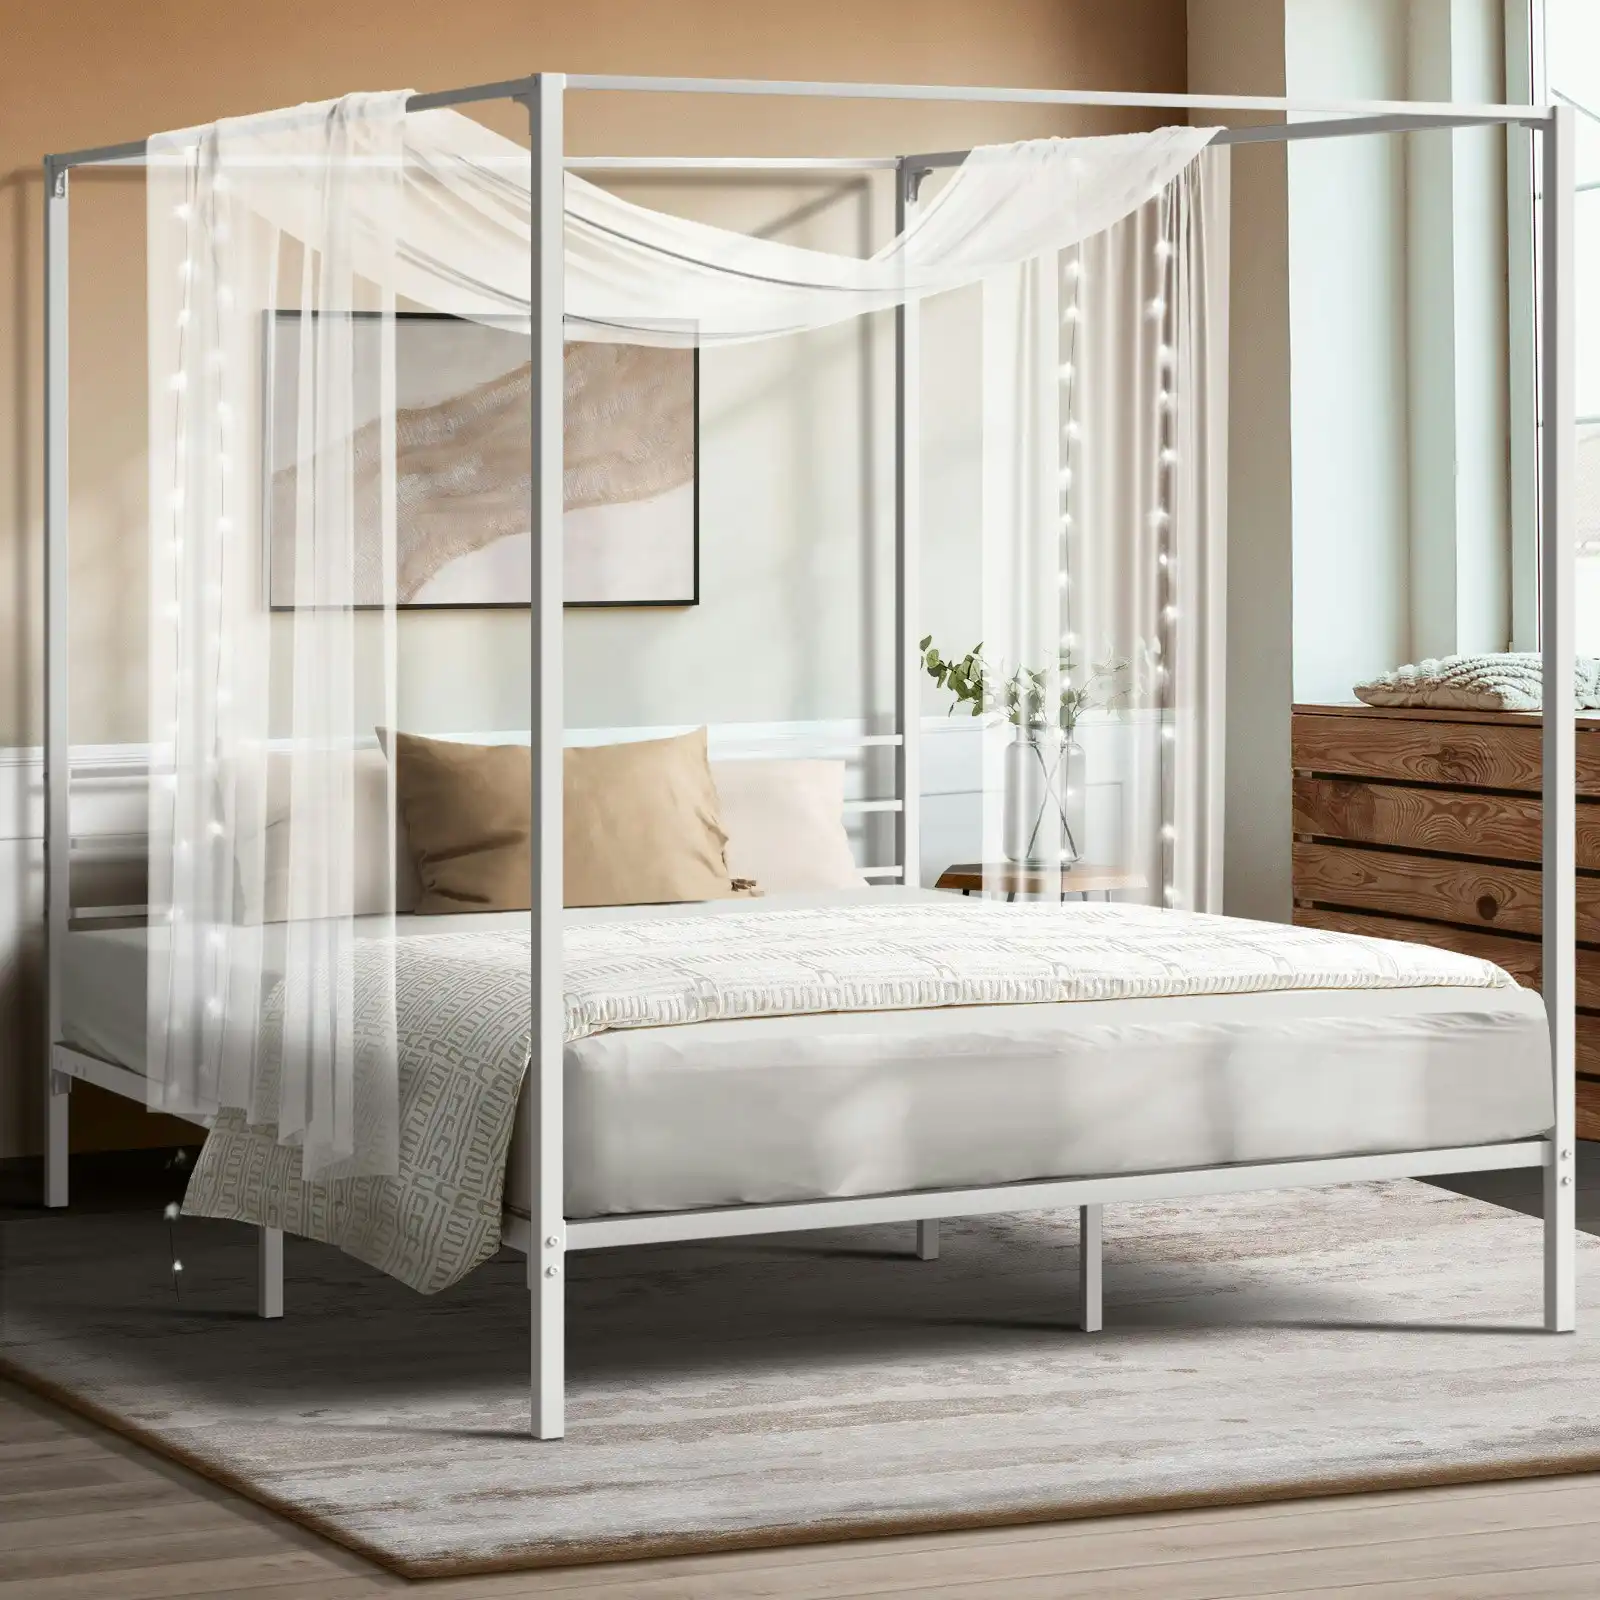 Oikiture Metal Canopy Bed Frame Queen Size Beds Platform White